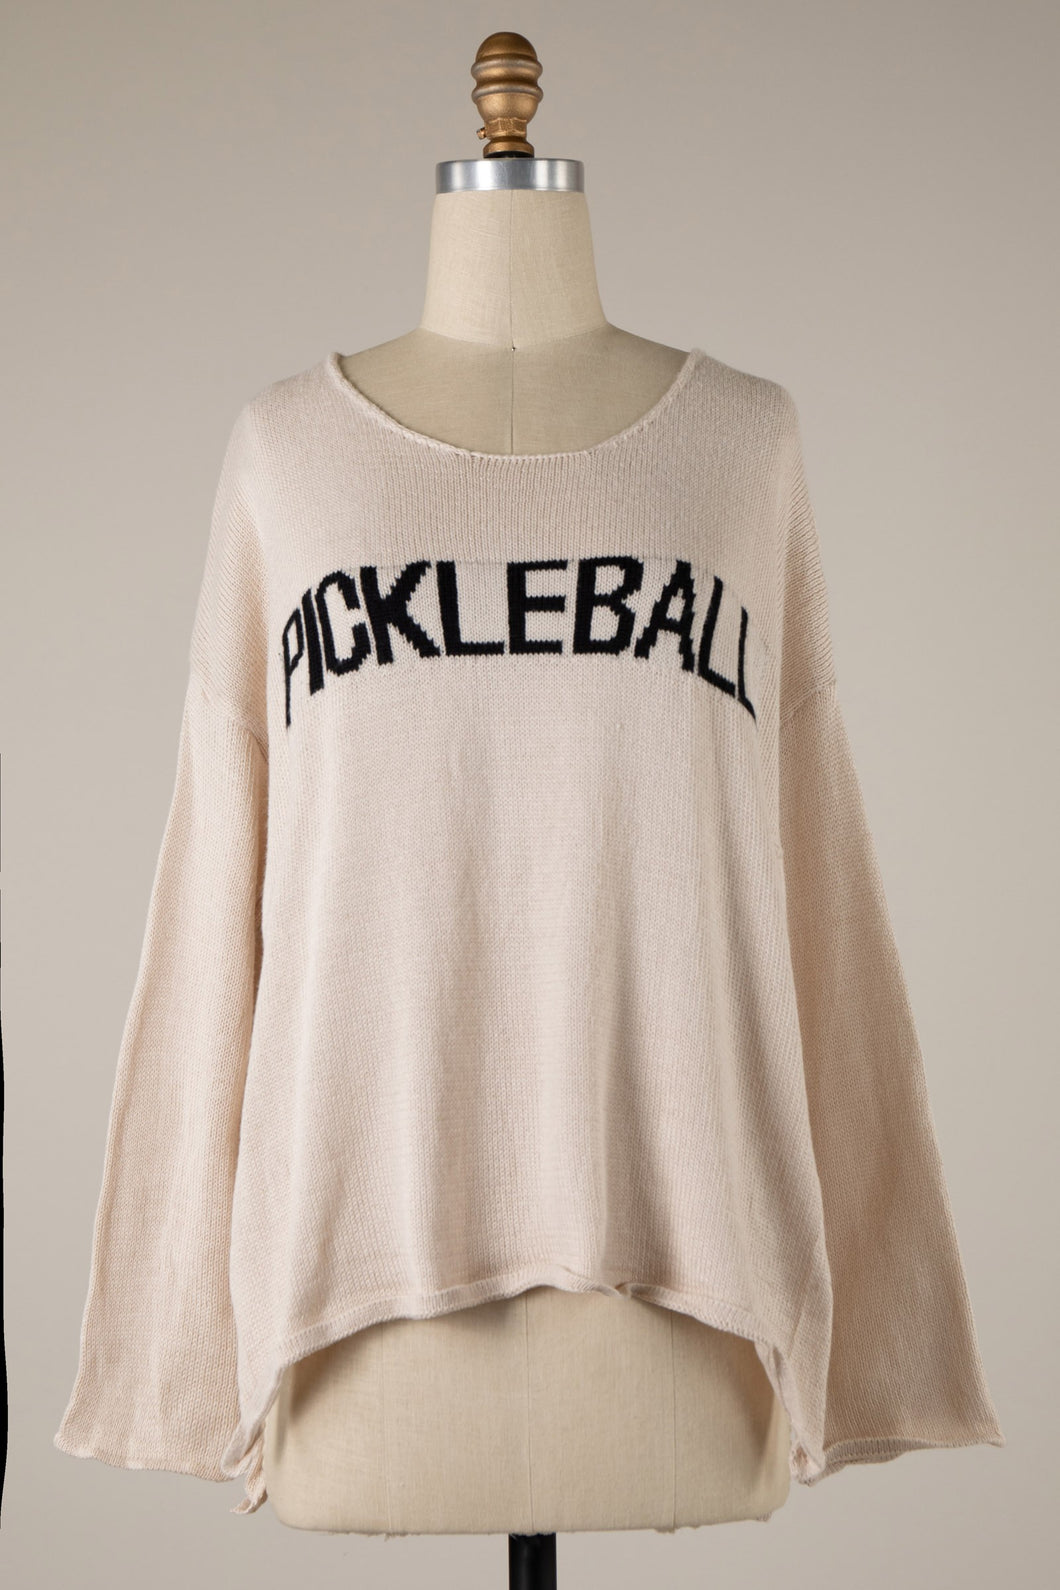 Pickle-ball Sweater